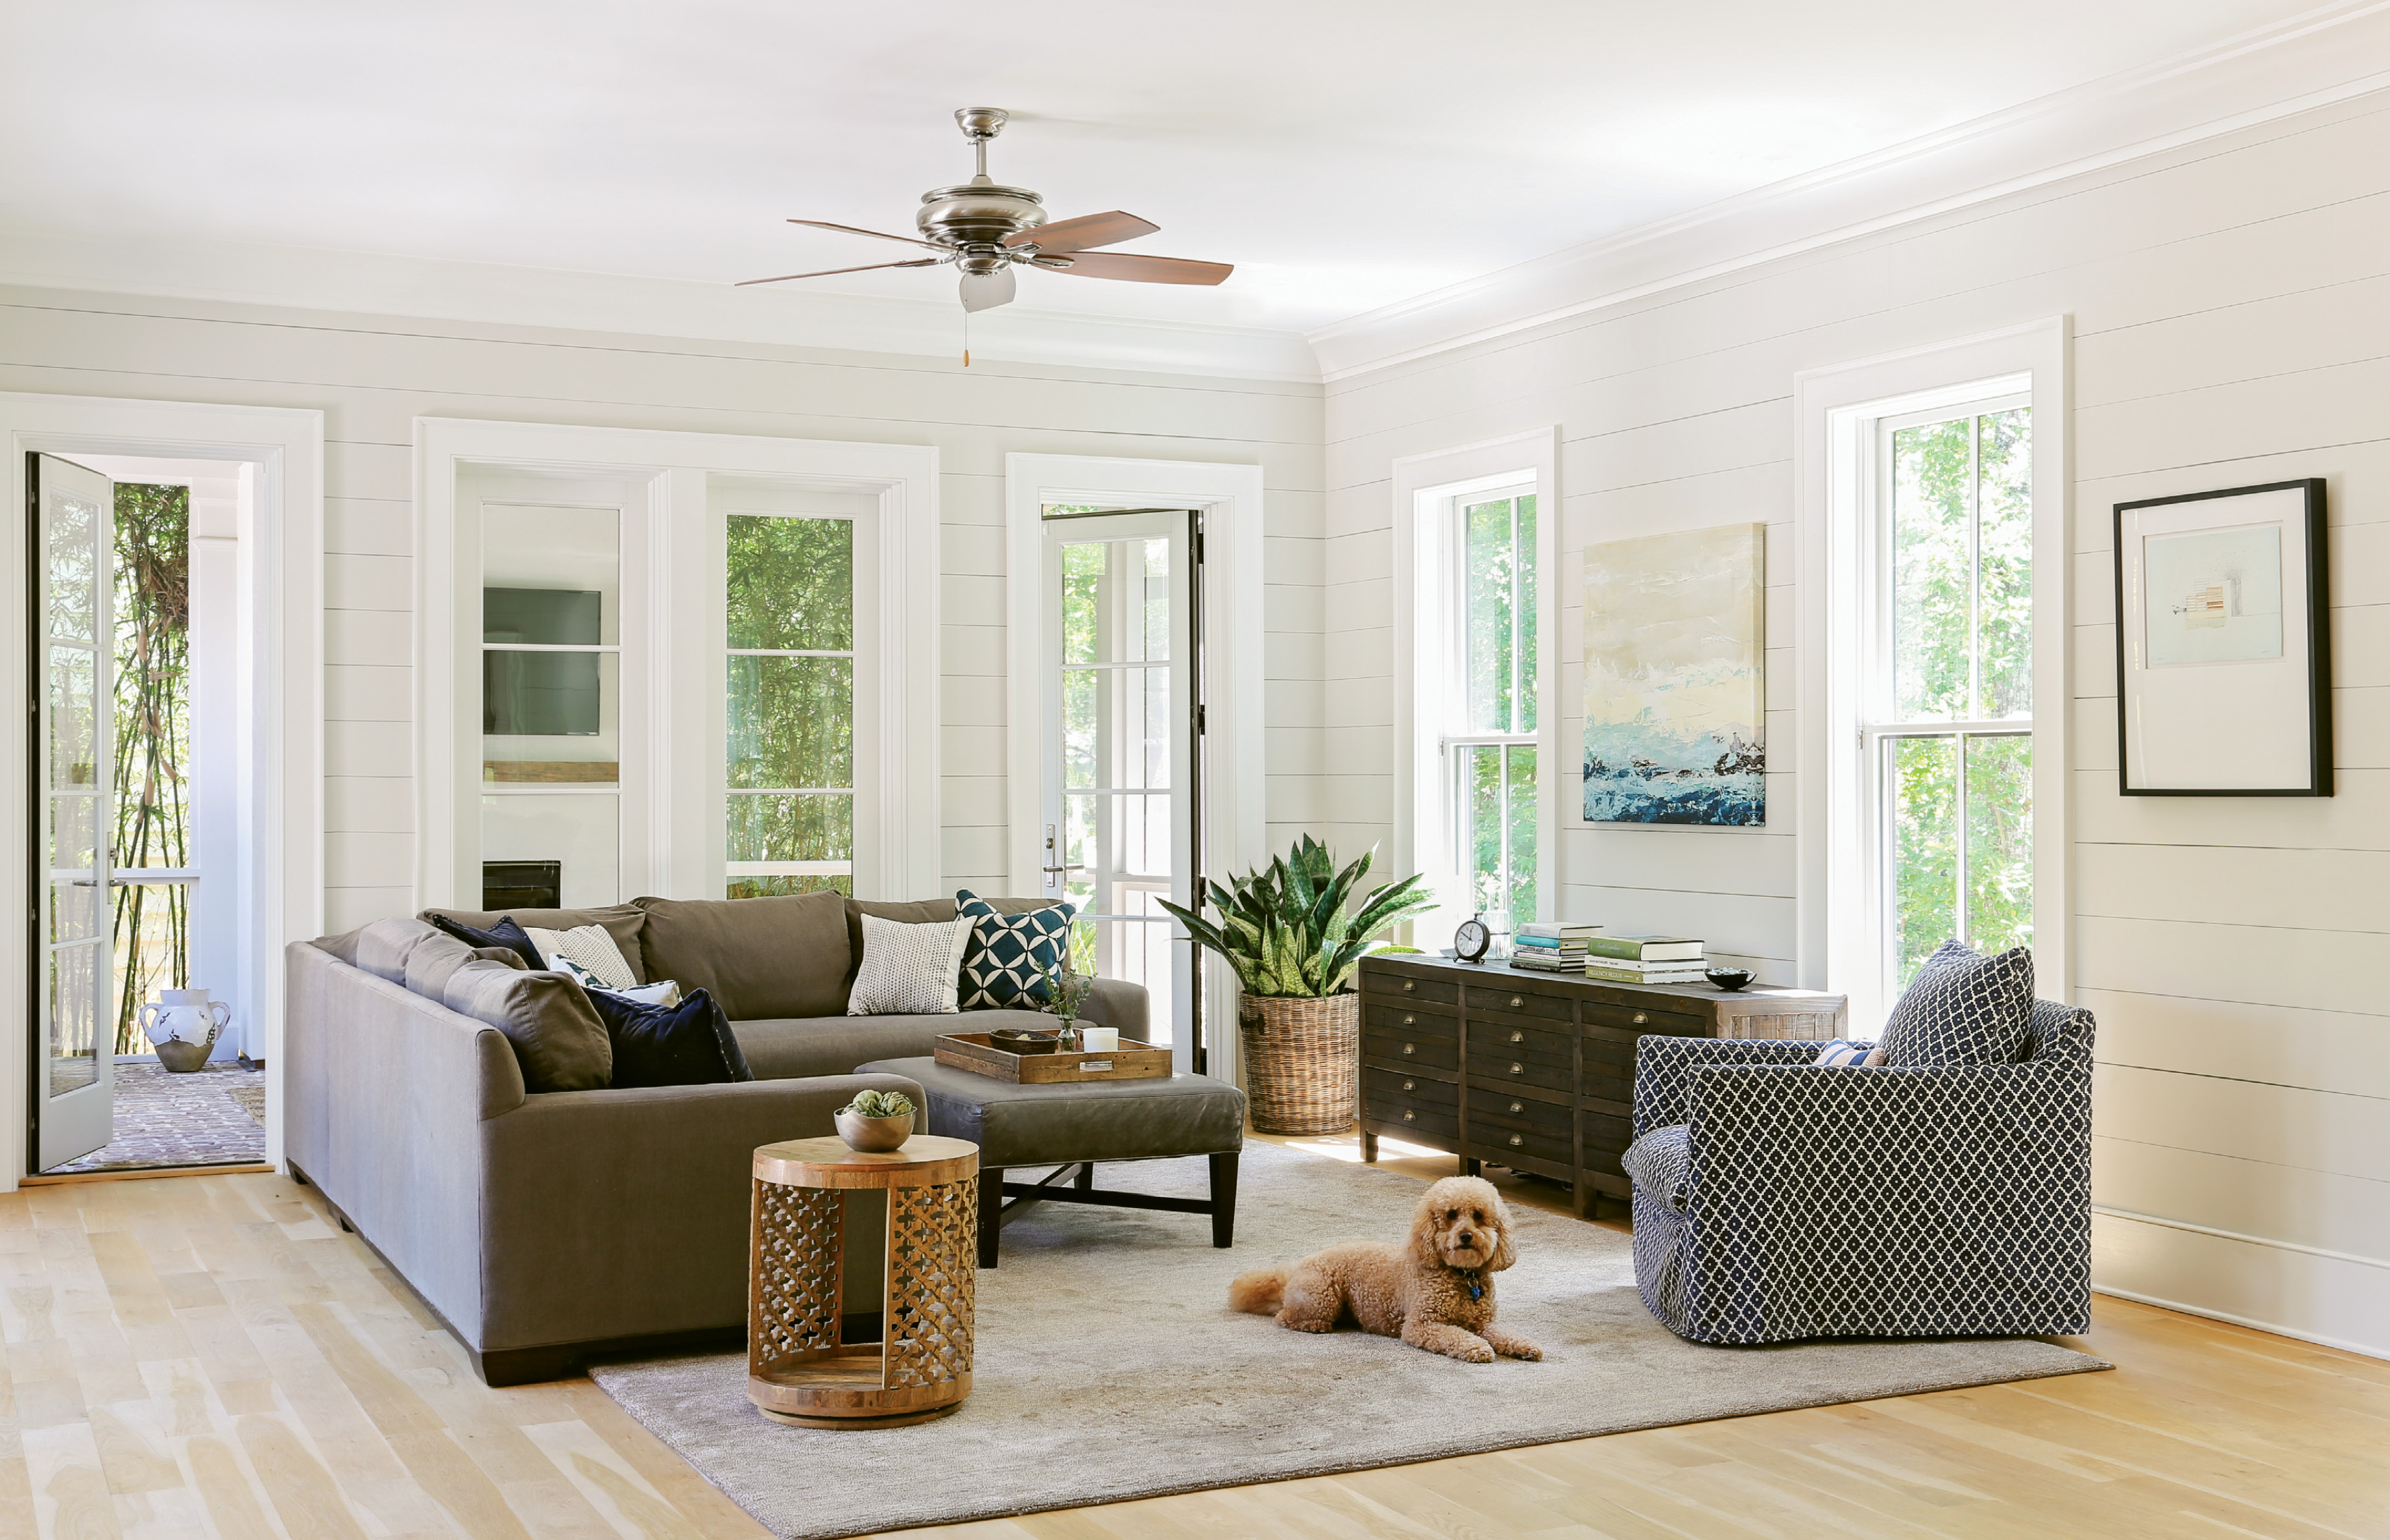 Lap &amp; Light: Shiplap walls throughout the main living and dining rooms give a “buttoned-up” feel to the casual décor, says Lenox. Loads of natural light energize the airy rooms, and a calming palette of soft greys adds a sophisticated feel.